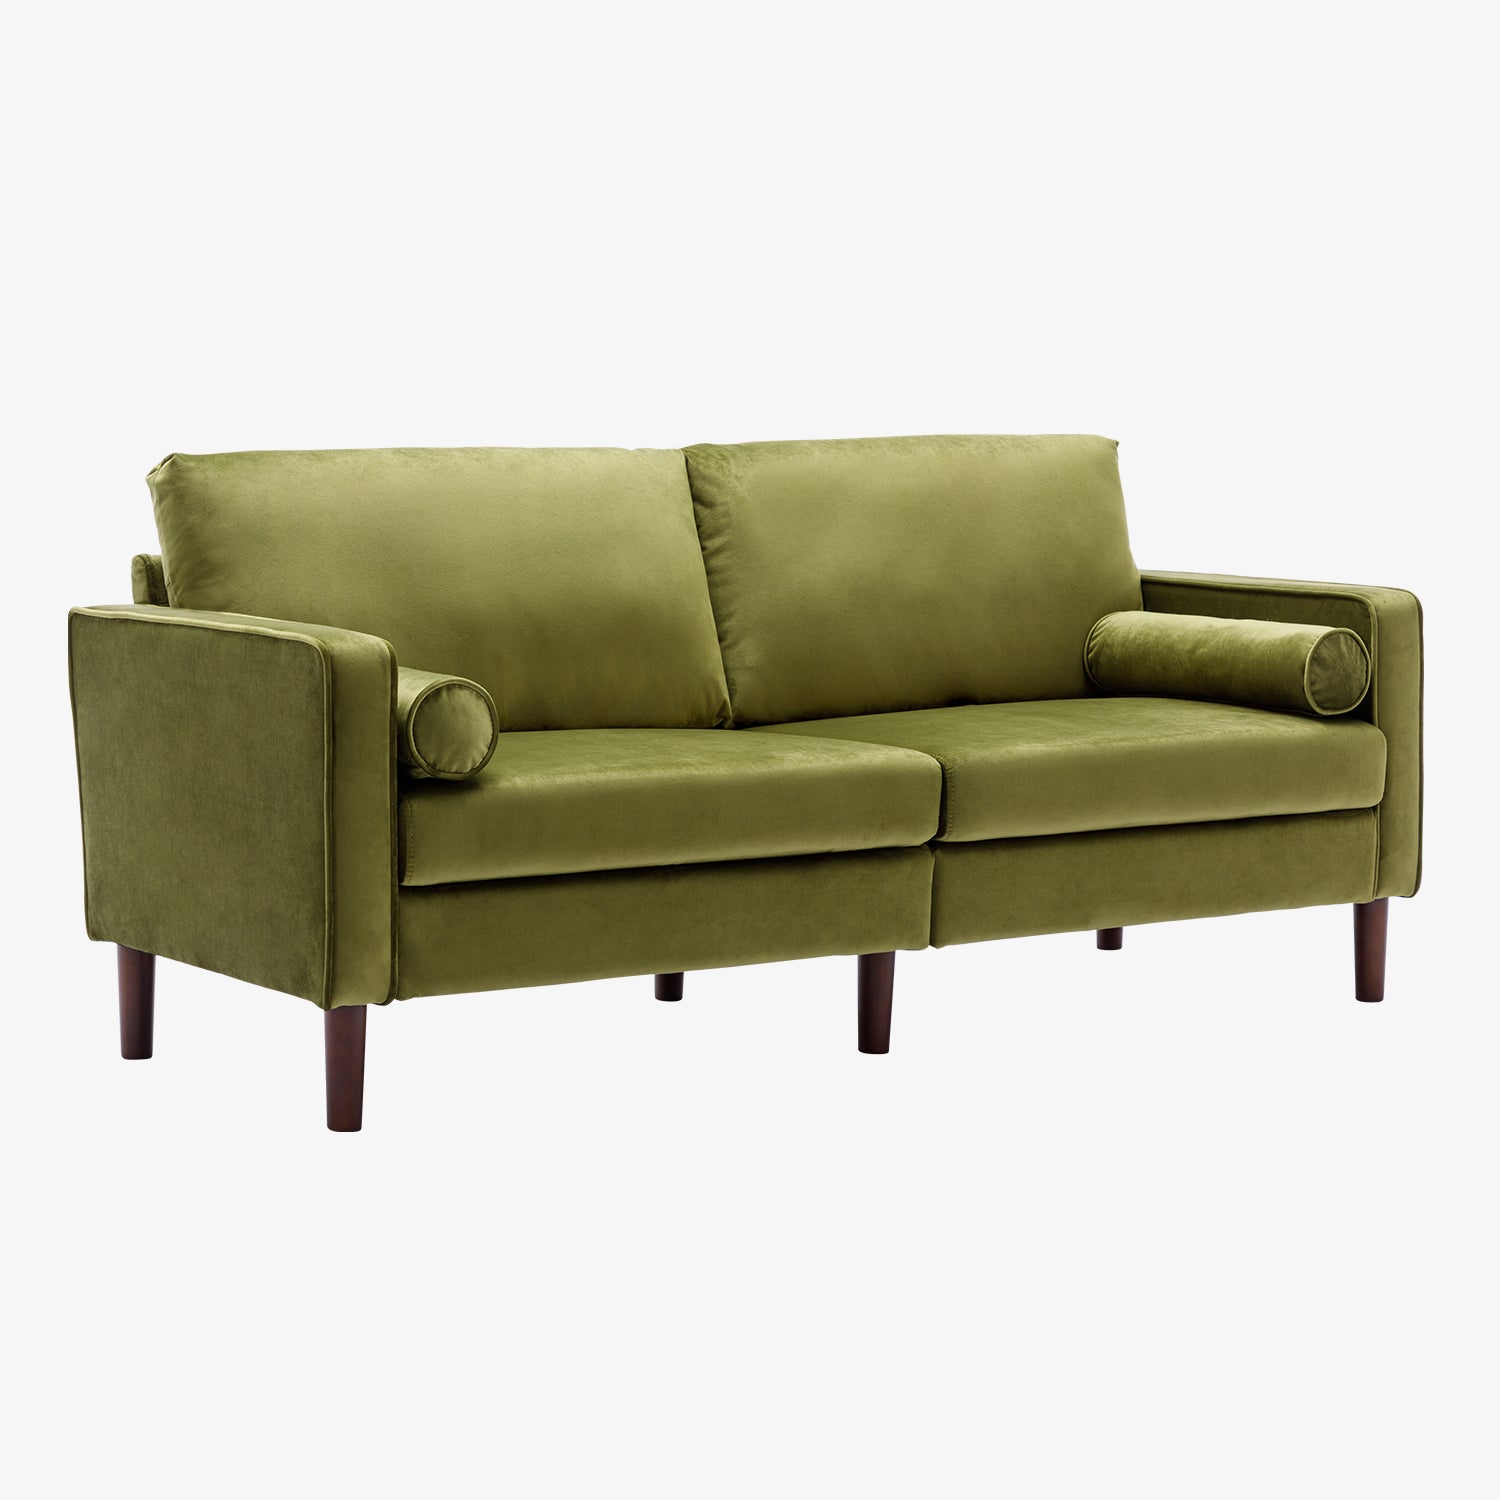 Evo 77” Mid-Century Loveseat, Modern Sofa with Two Upholstered Cushions